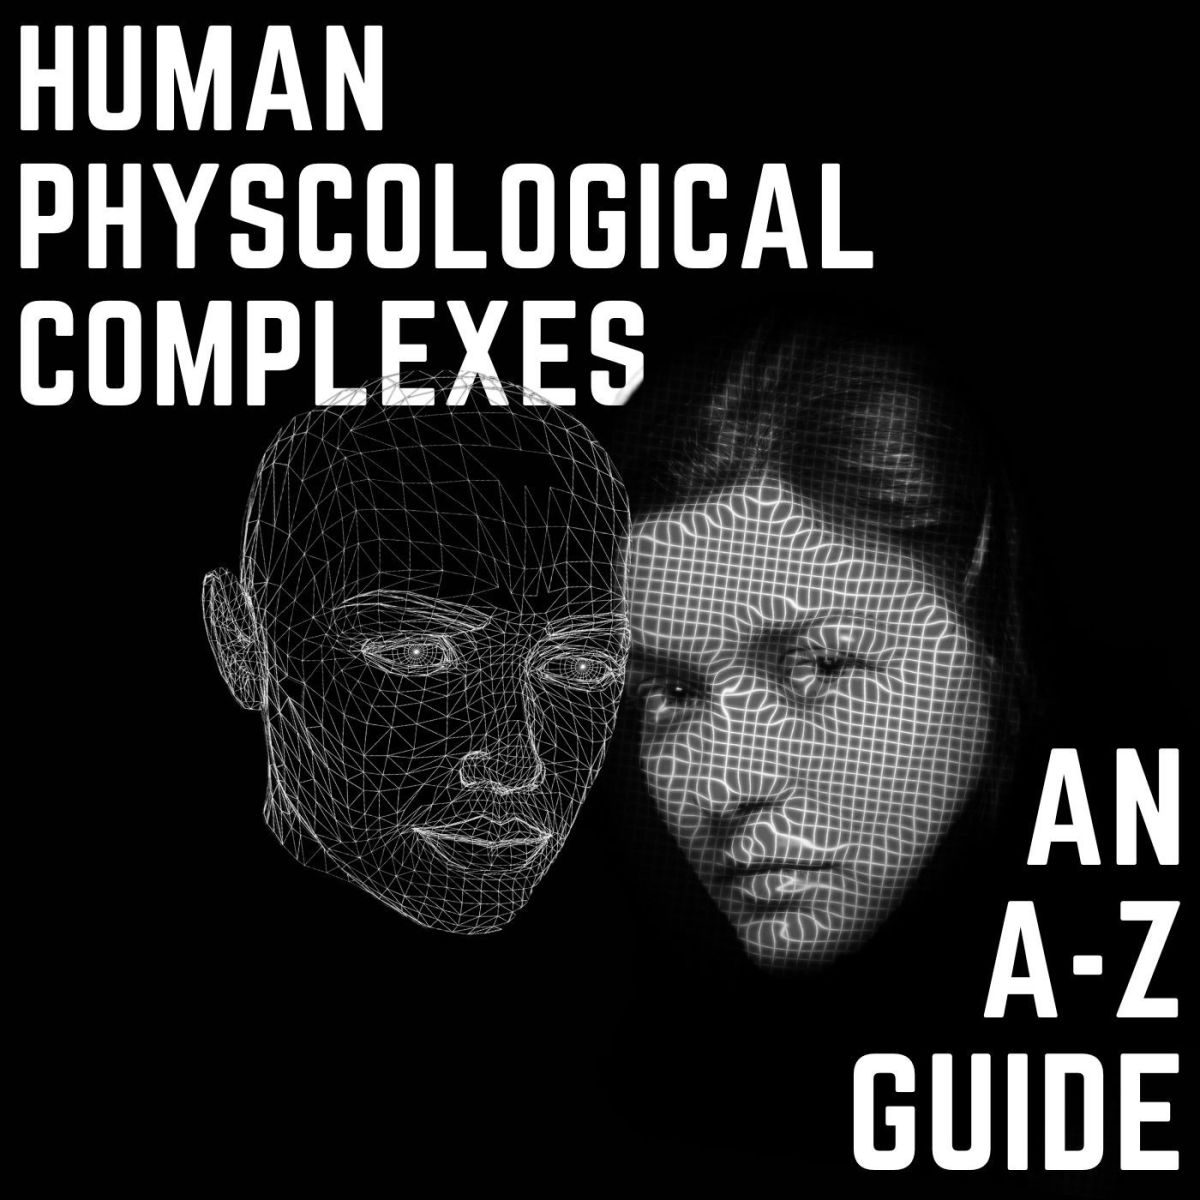 Exploring the Human Psychological Complexes A - Z